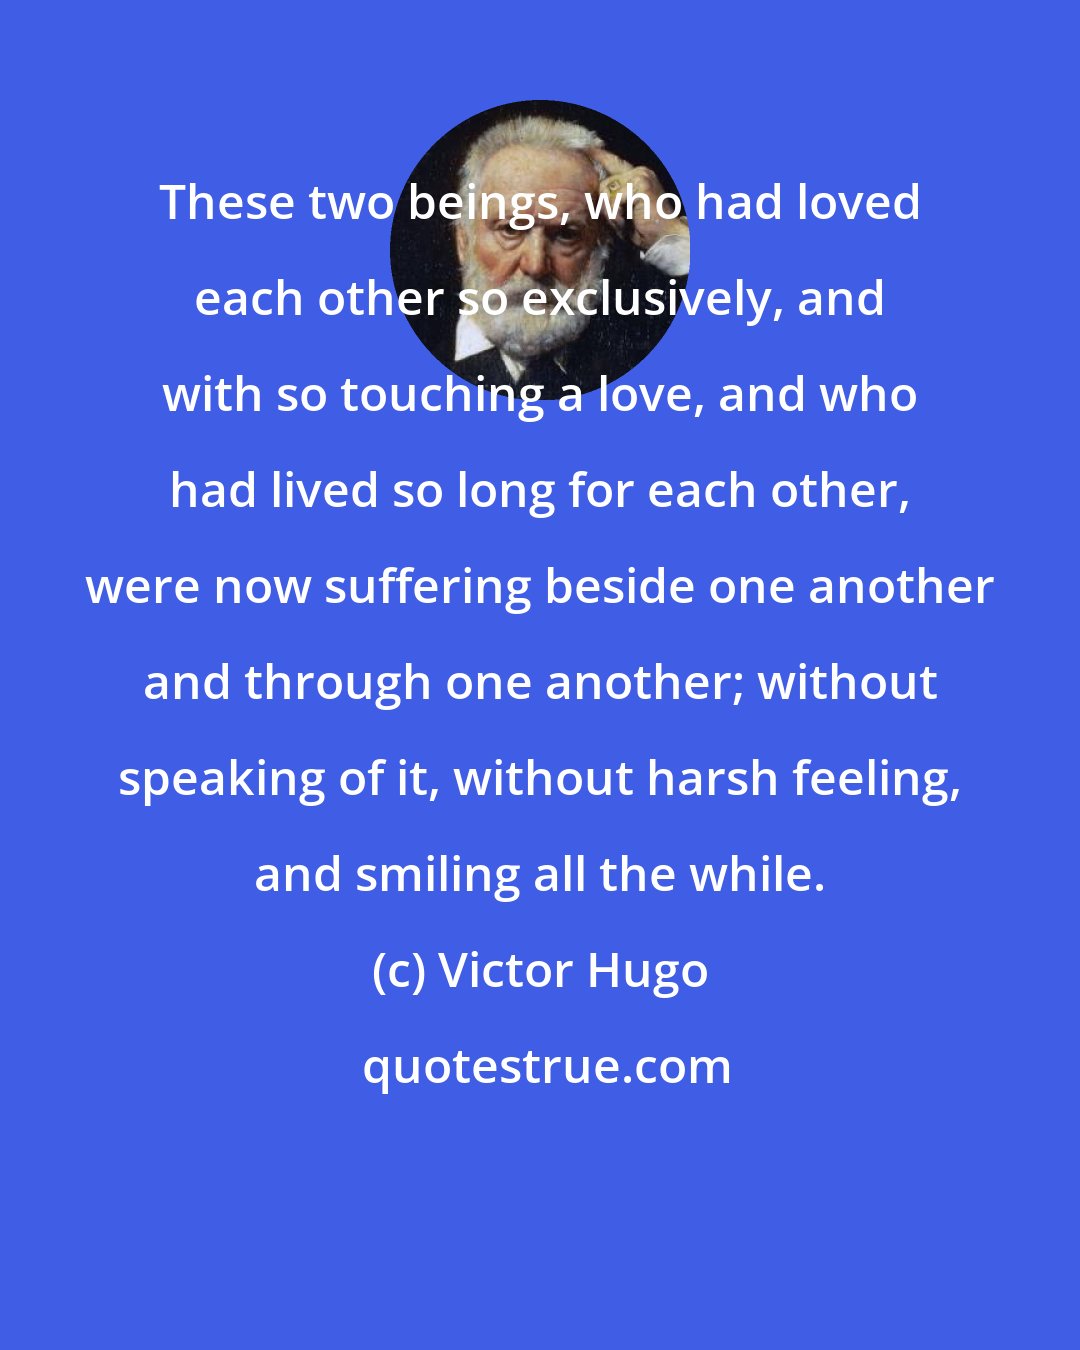 Victor Hugo: These two beings, who had loved each other so exclusively, and with so touching a love, and who had lived so long for each other, were now suffering beside one another and through one another; without speaking of it, without harsh feeling, and smiling all the while.